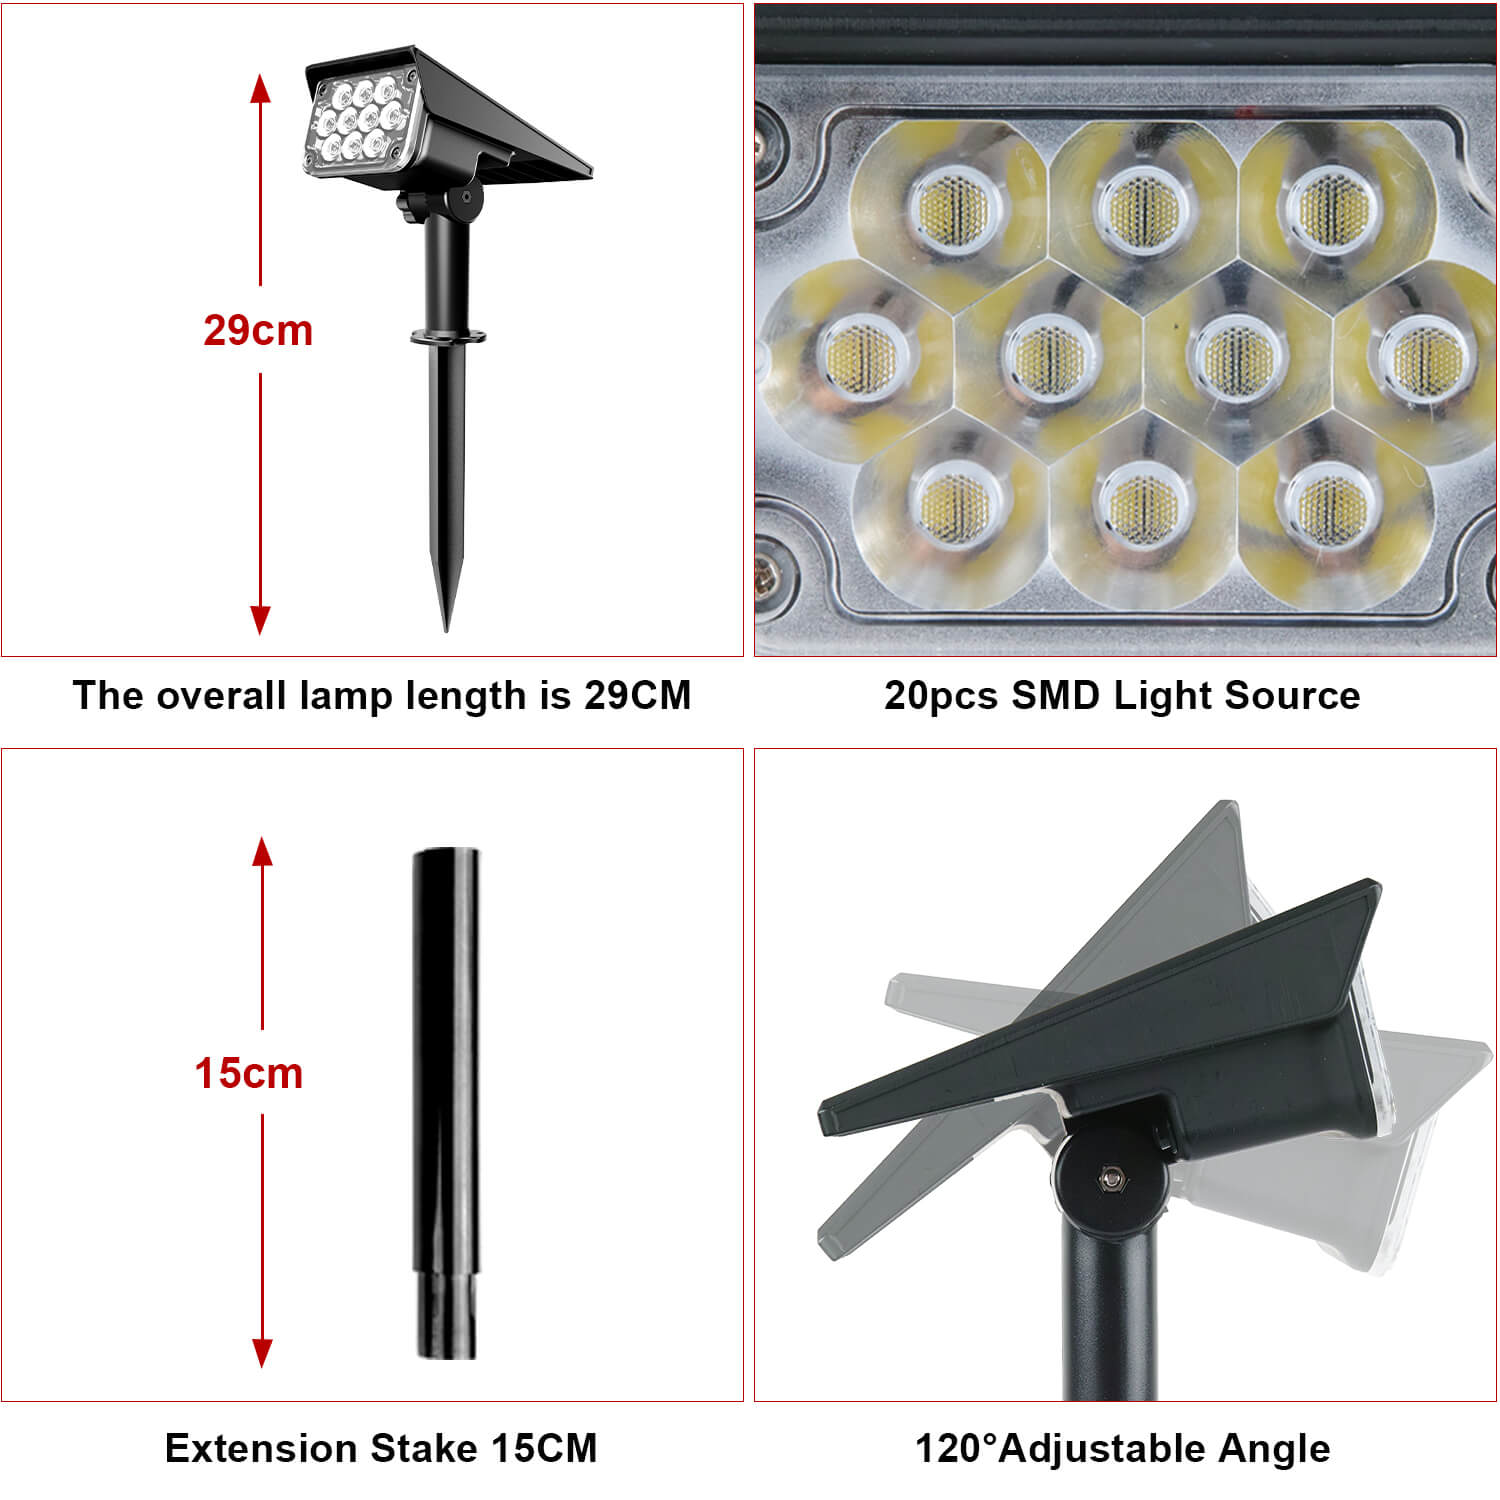 The total length of the lamp is 29CM (With extension arm 15cm)